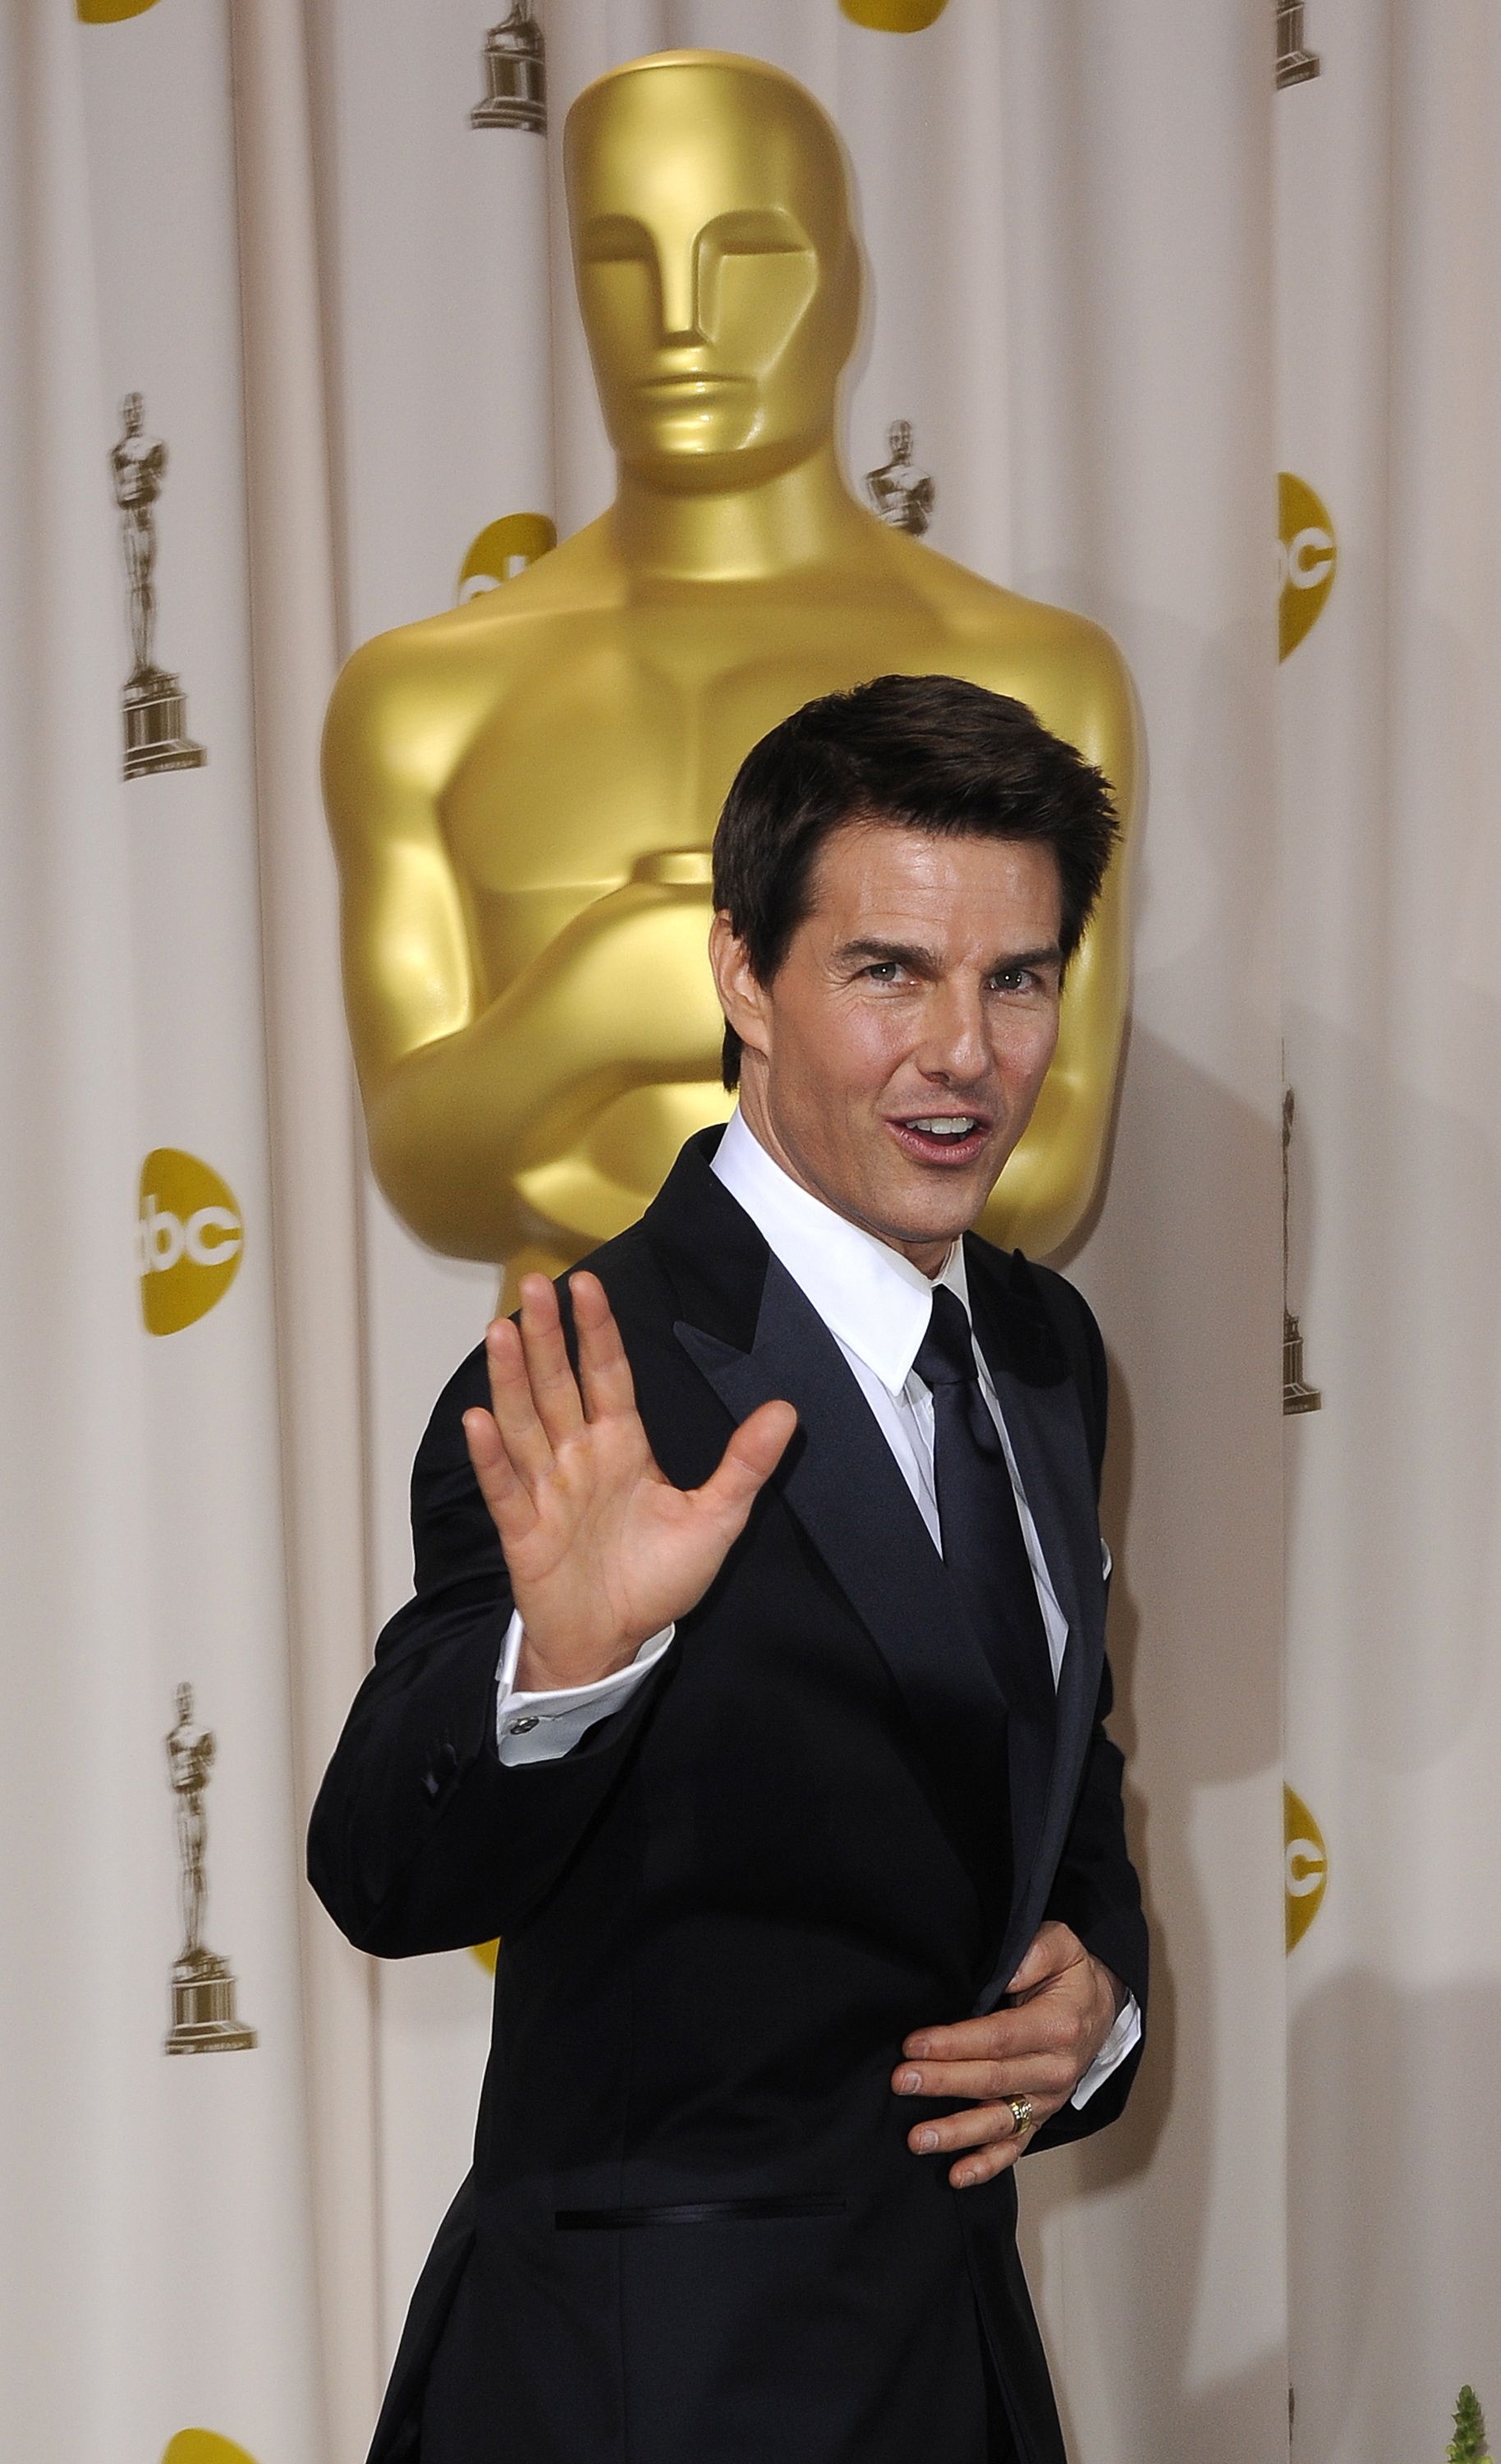 Why Isn’t Tom Cruise at Oscars 2023? Skipped, Absence